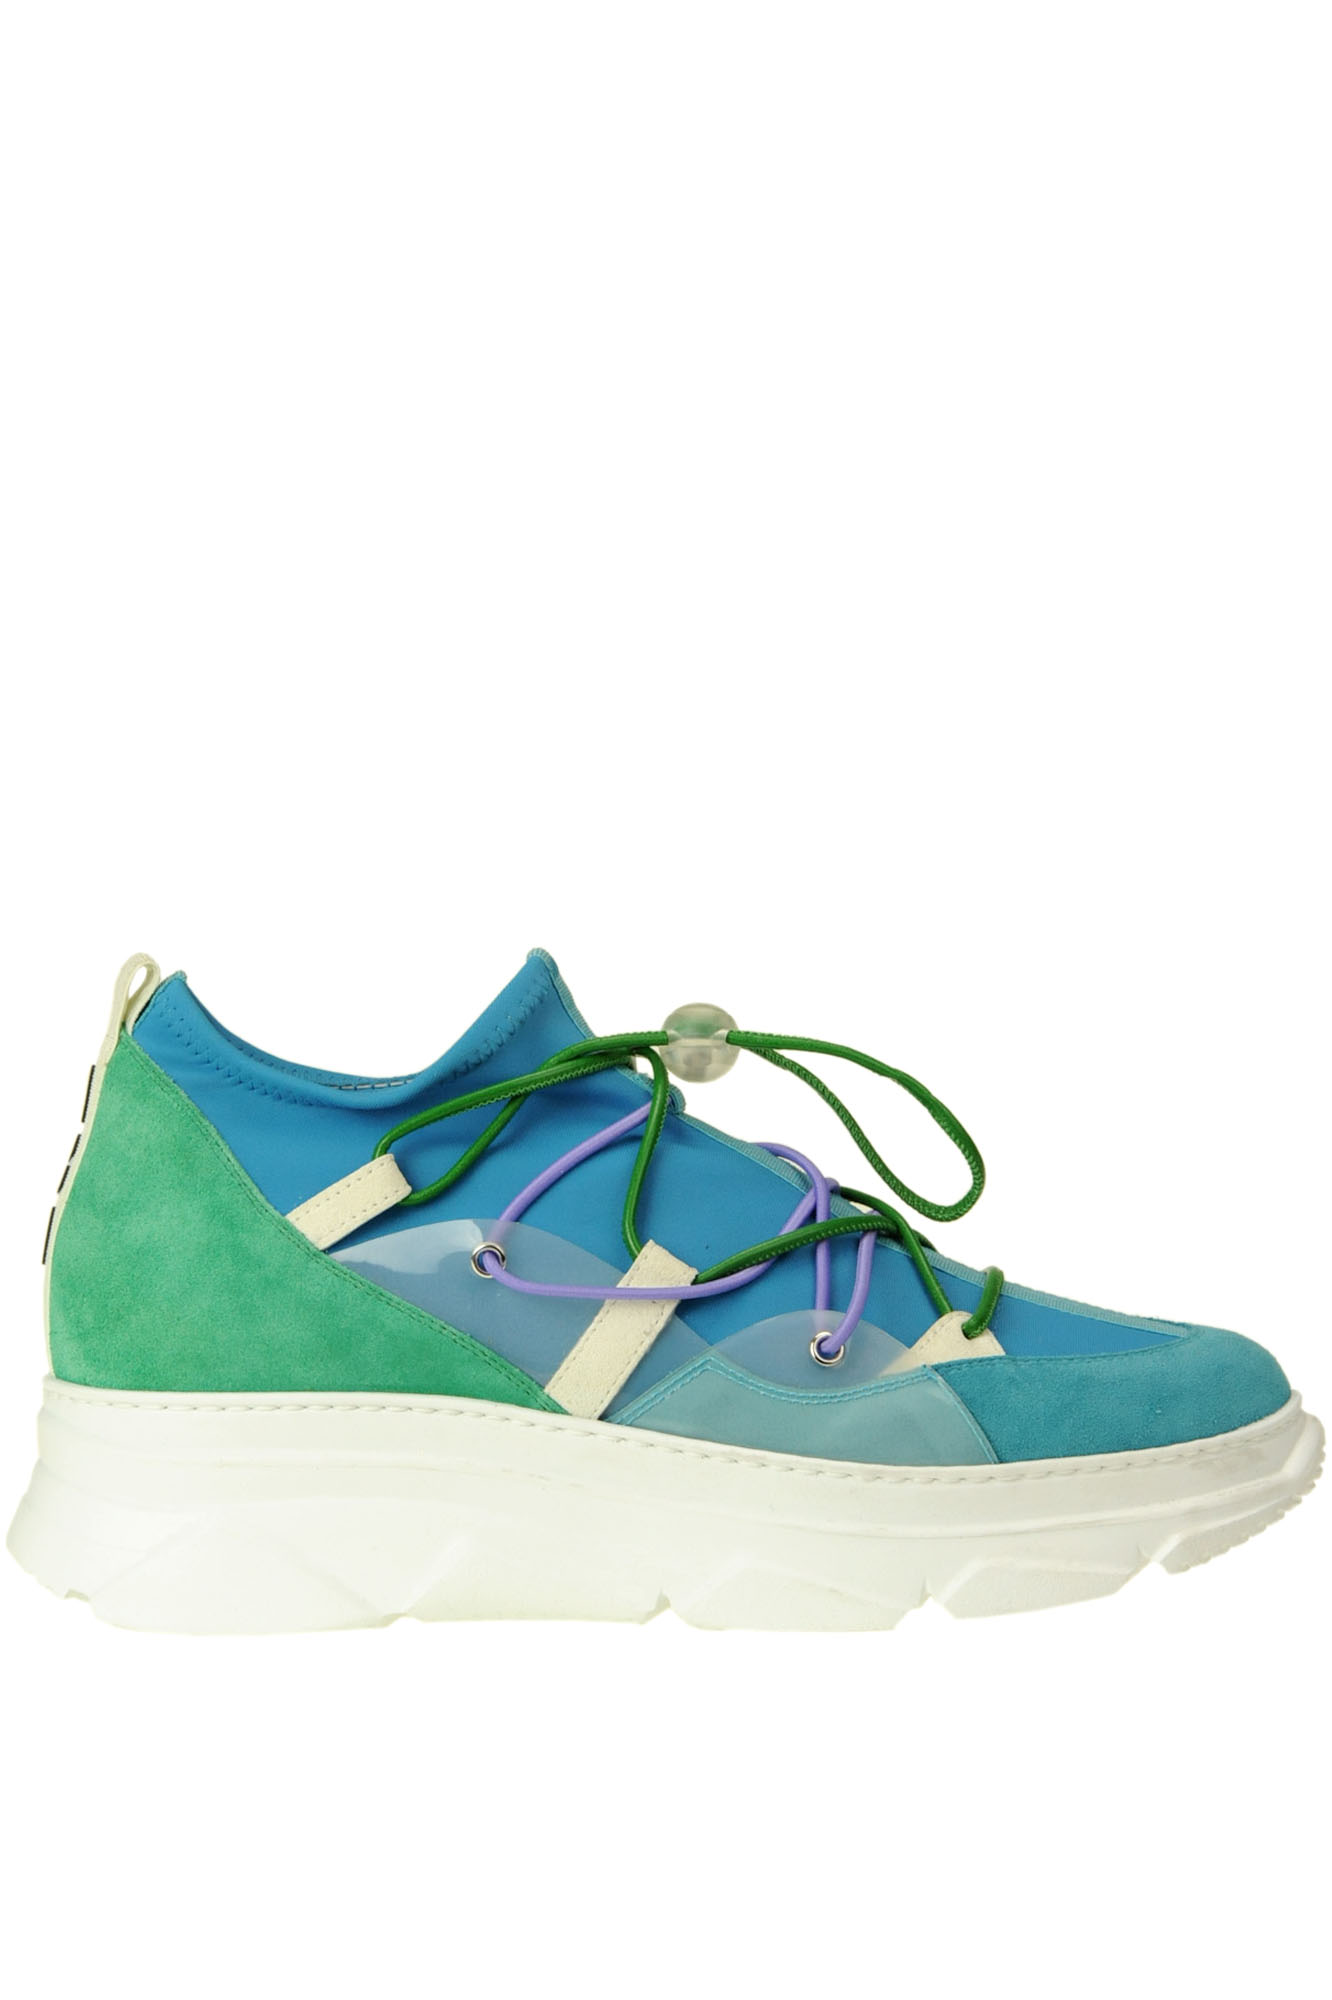 181 Slip On Sneakers In Turquoise